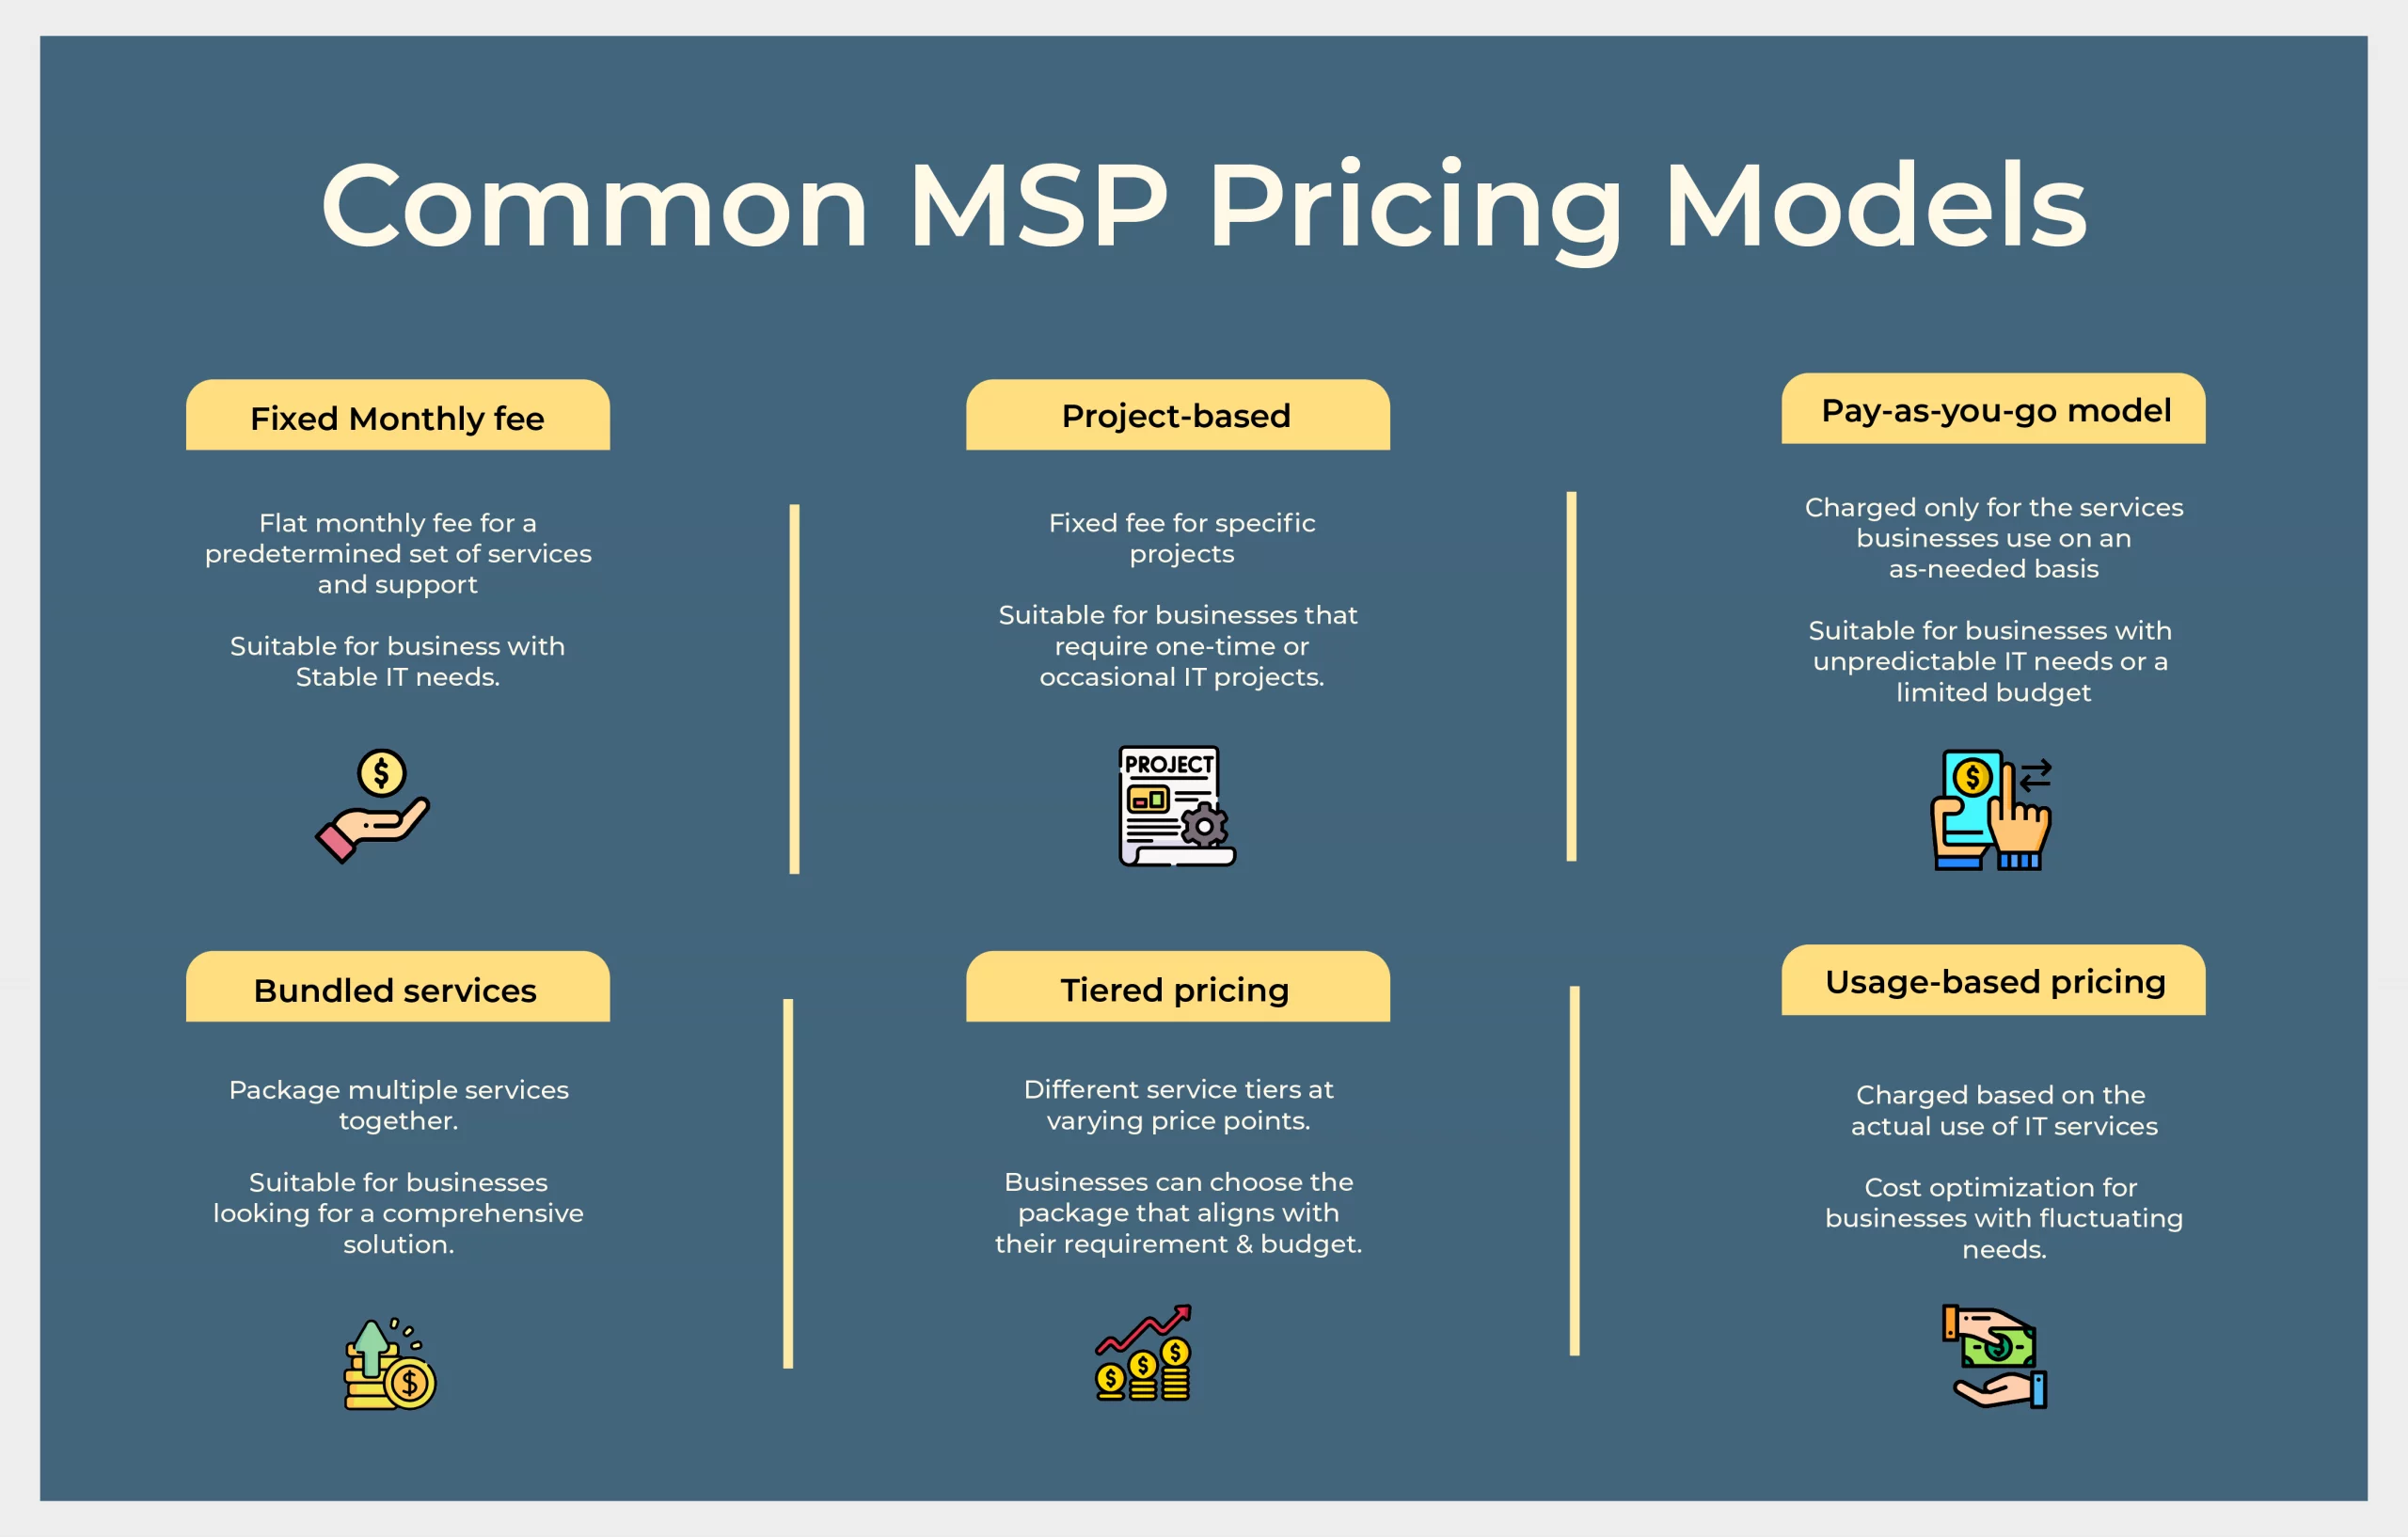 Common MSP pricing models